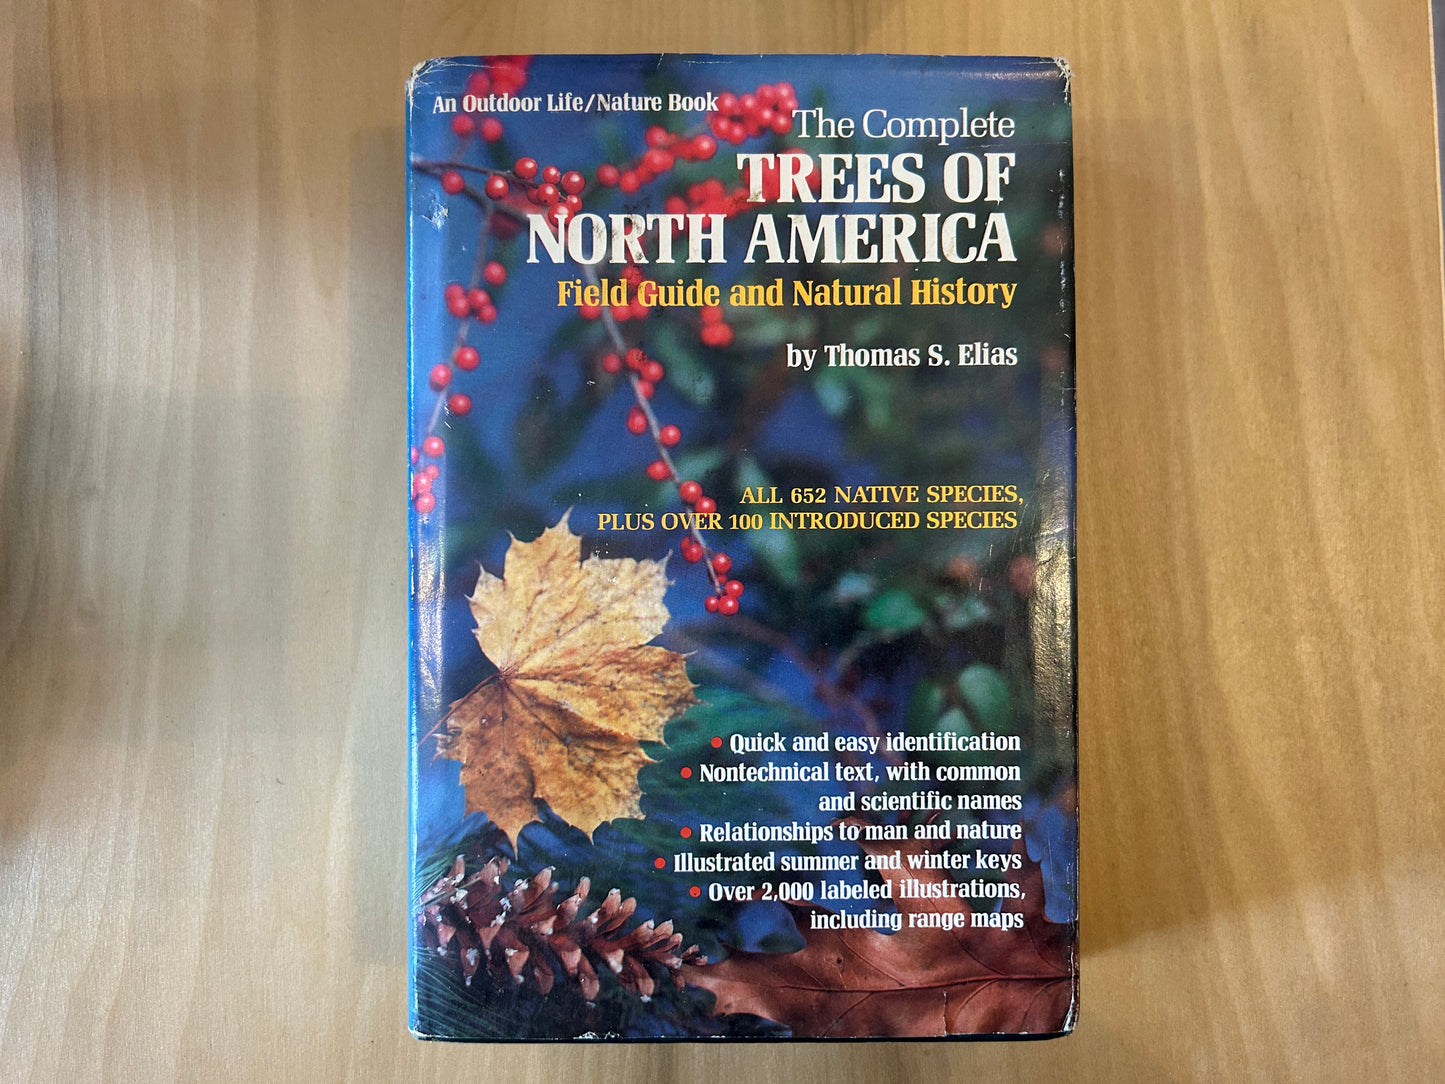 The Complete Trees of North America: Field Guide and Natural History by Thomas S. Elias (A Golden Field Guide)